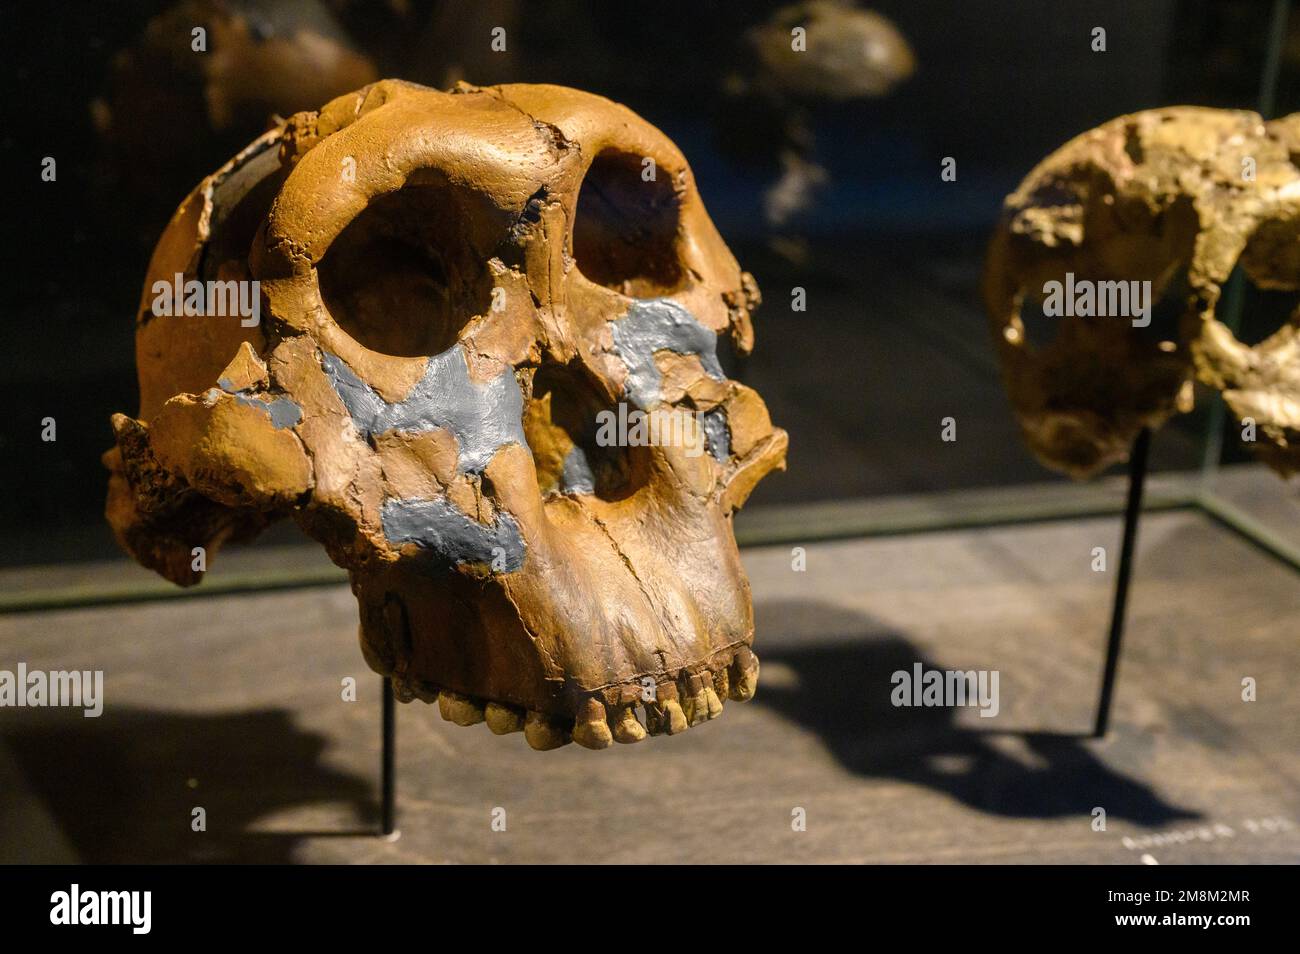 Paranthropus boisei. Male skull (cast). Found in Olduvai Gorge, Tanzania. On display in the Natural Sciences Museum in Brussels, Belgium. Stock Photo